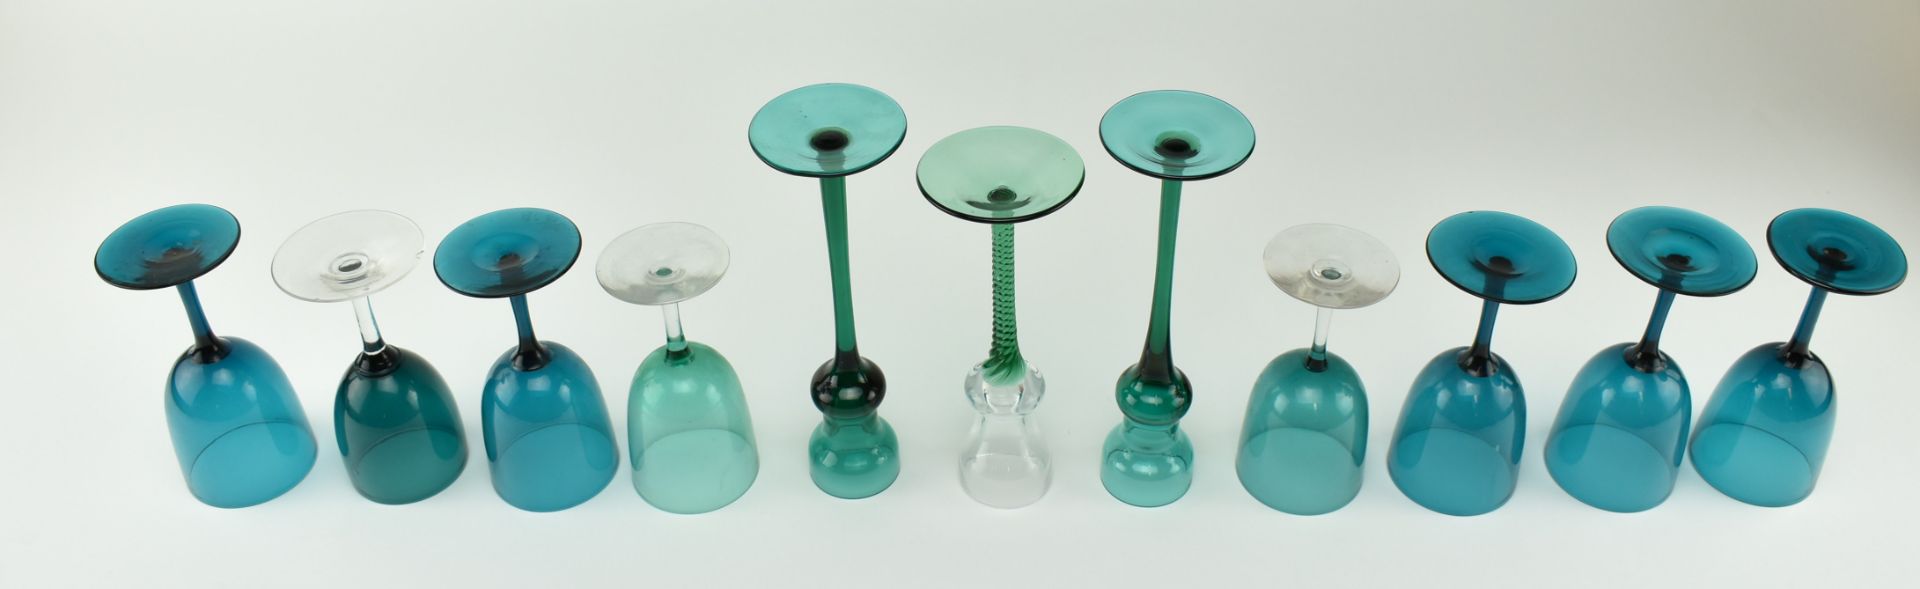 COLLECTION OF EARLY 20TH CENTURY TEAL DRINKING GLASSES - Image 8 of 11